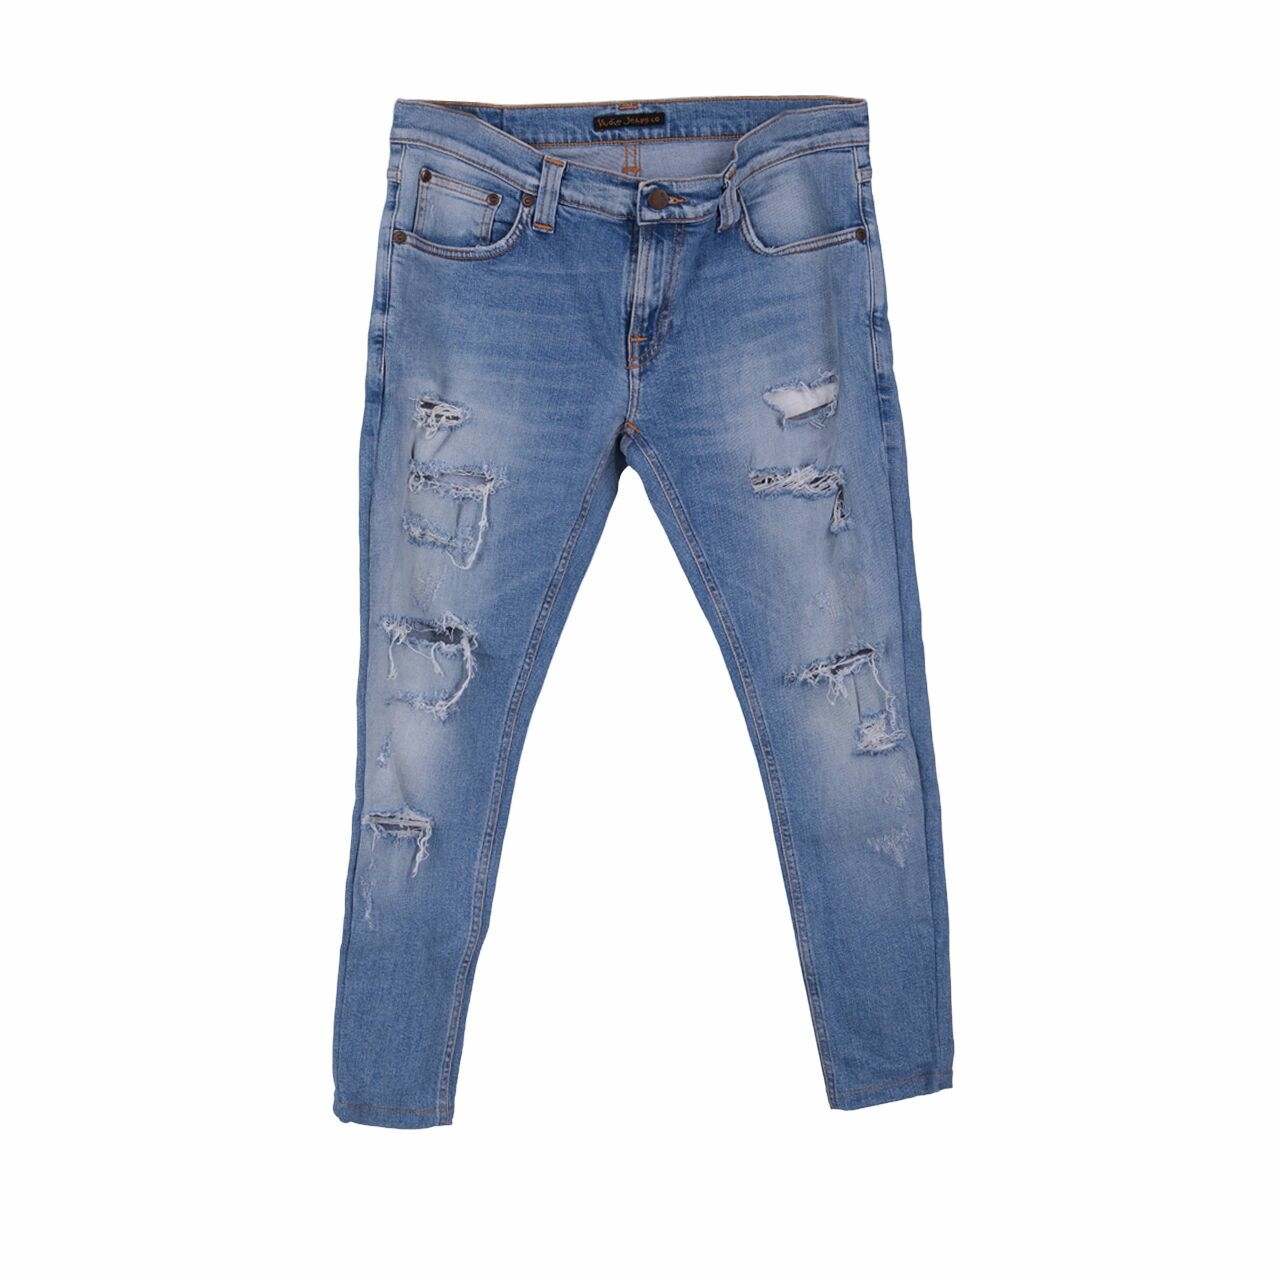 Nudie Jeans Blue Repped Long Pants